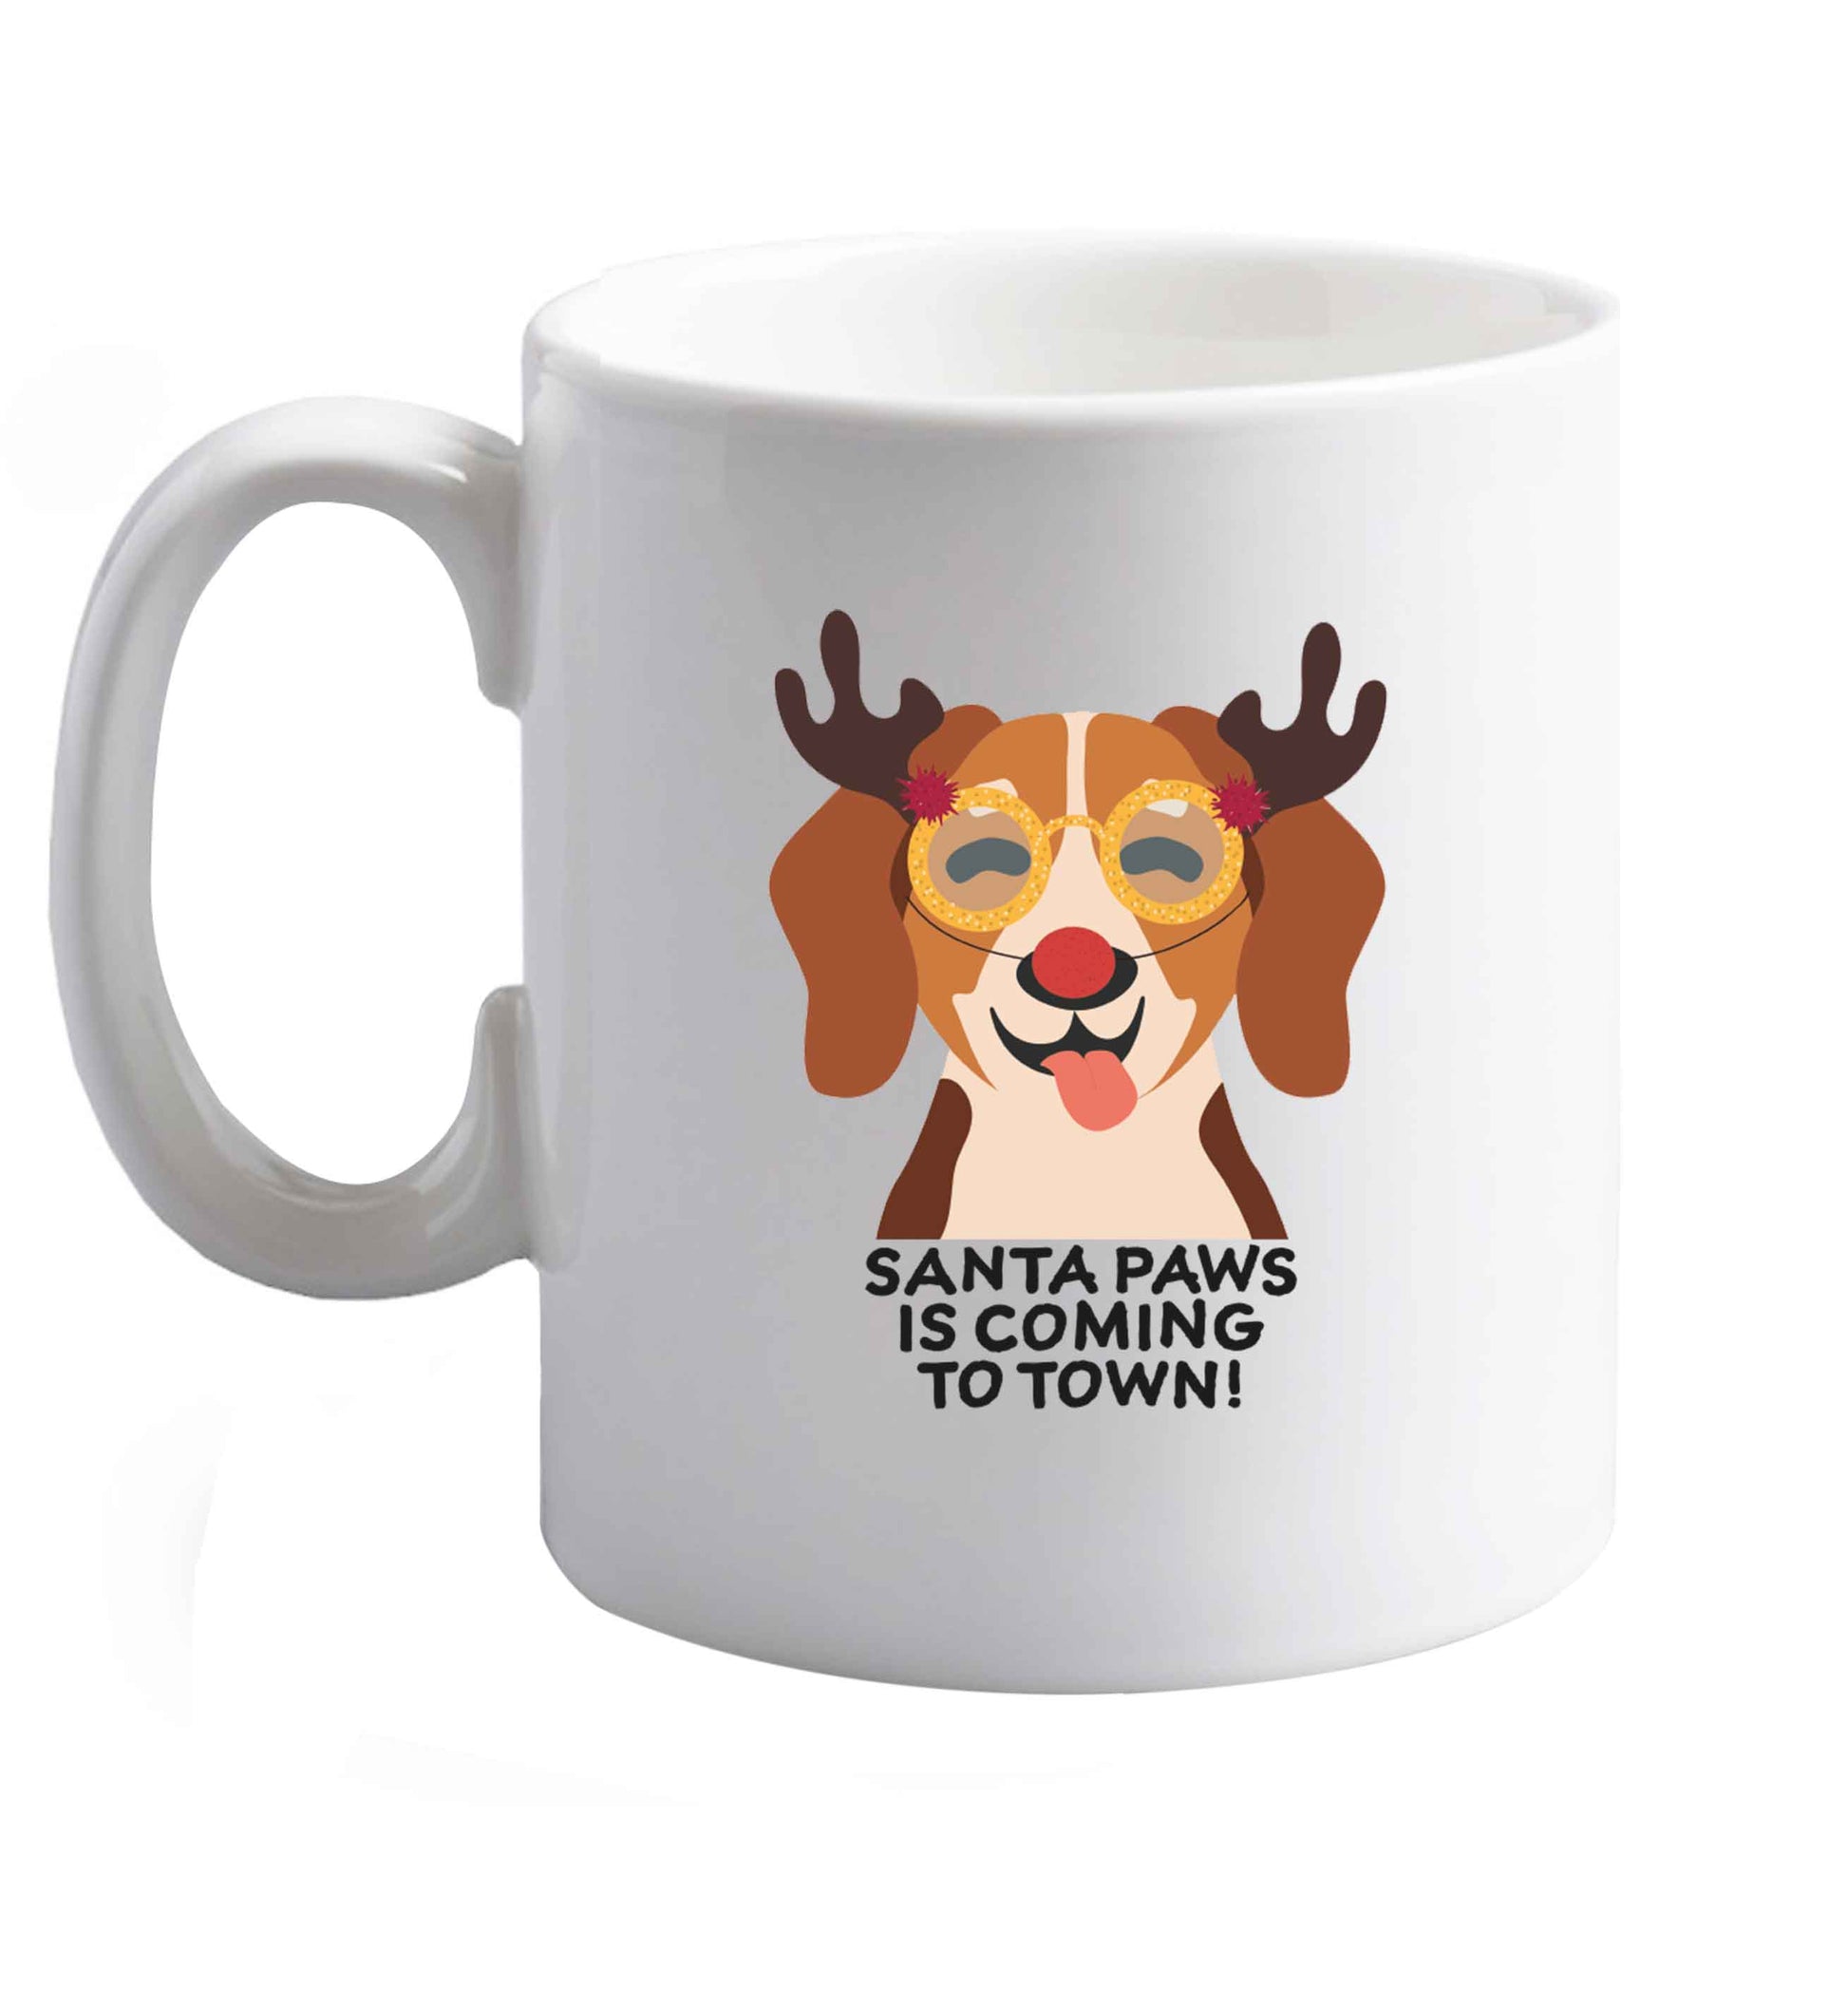 10 oz Santa paws is coming to town ceramic mug right handed